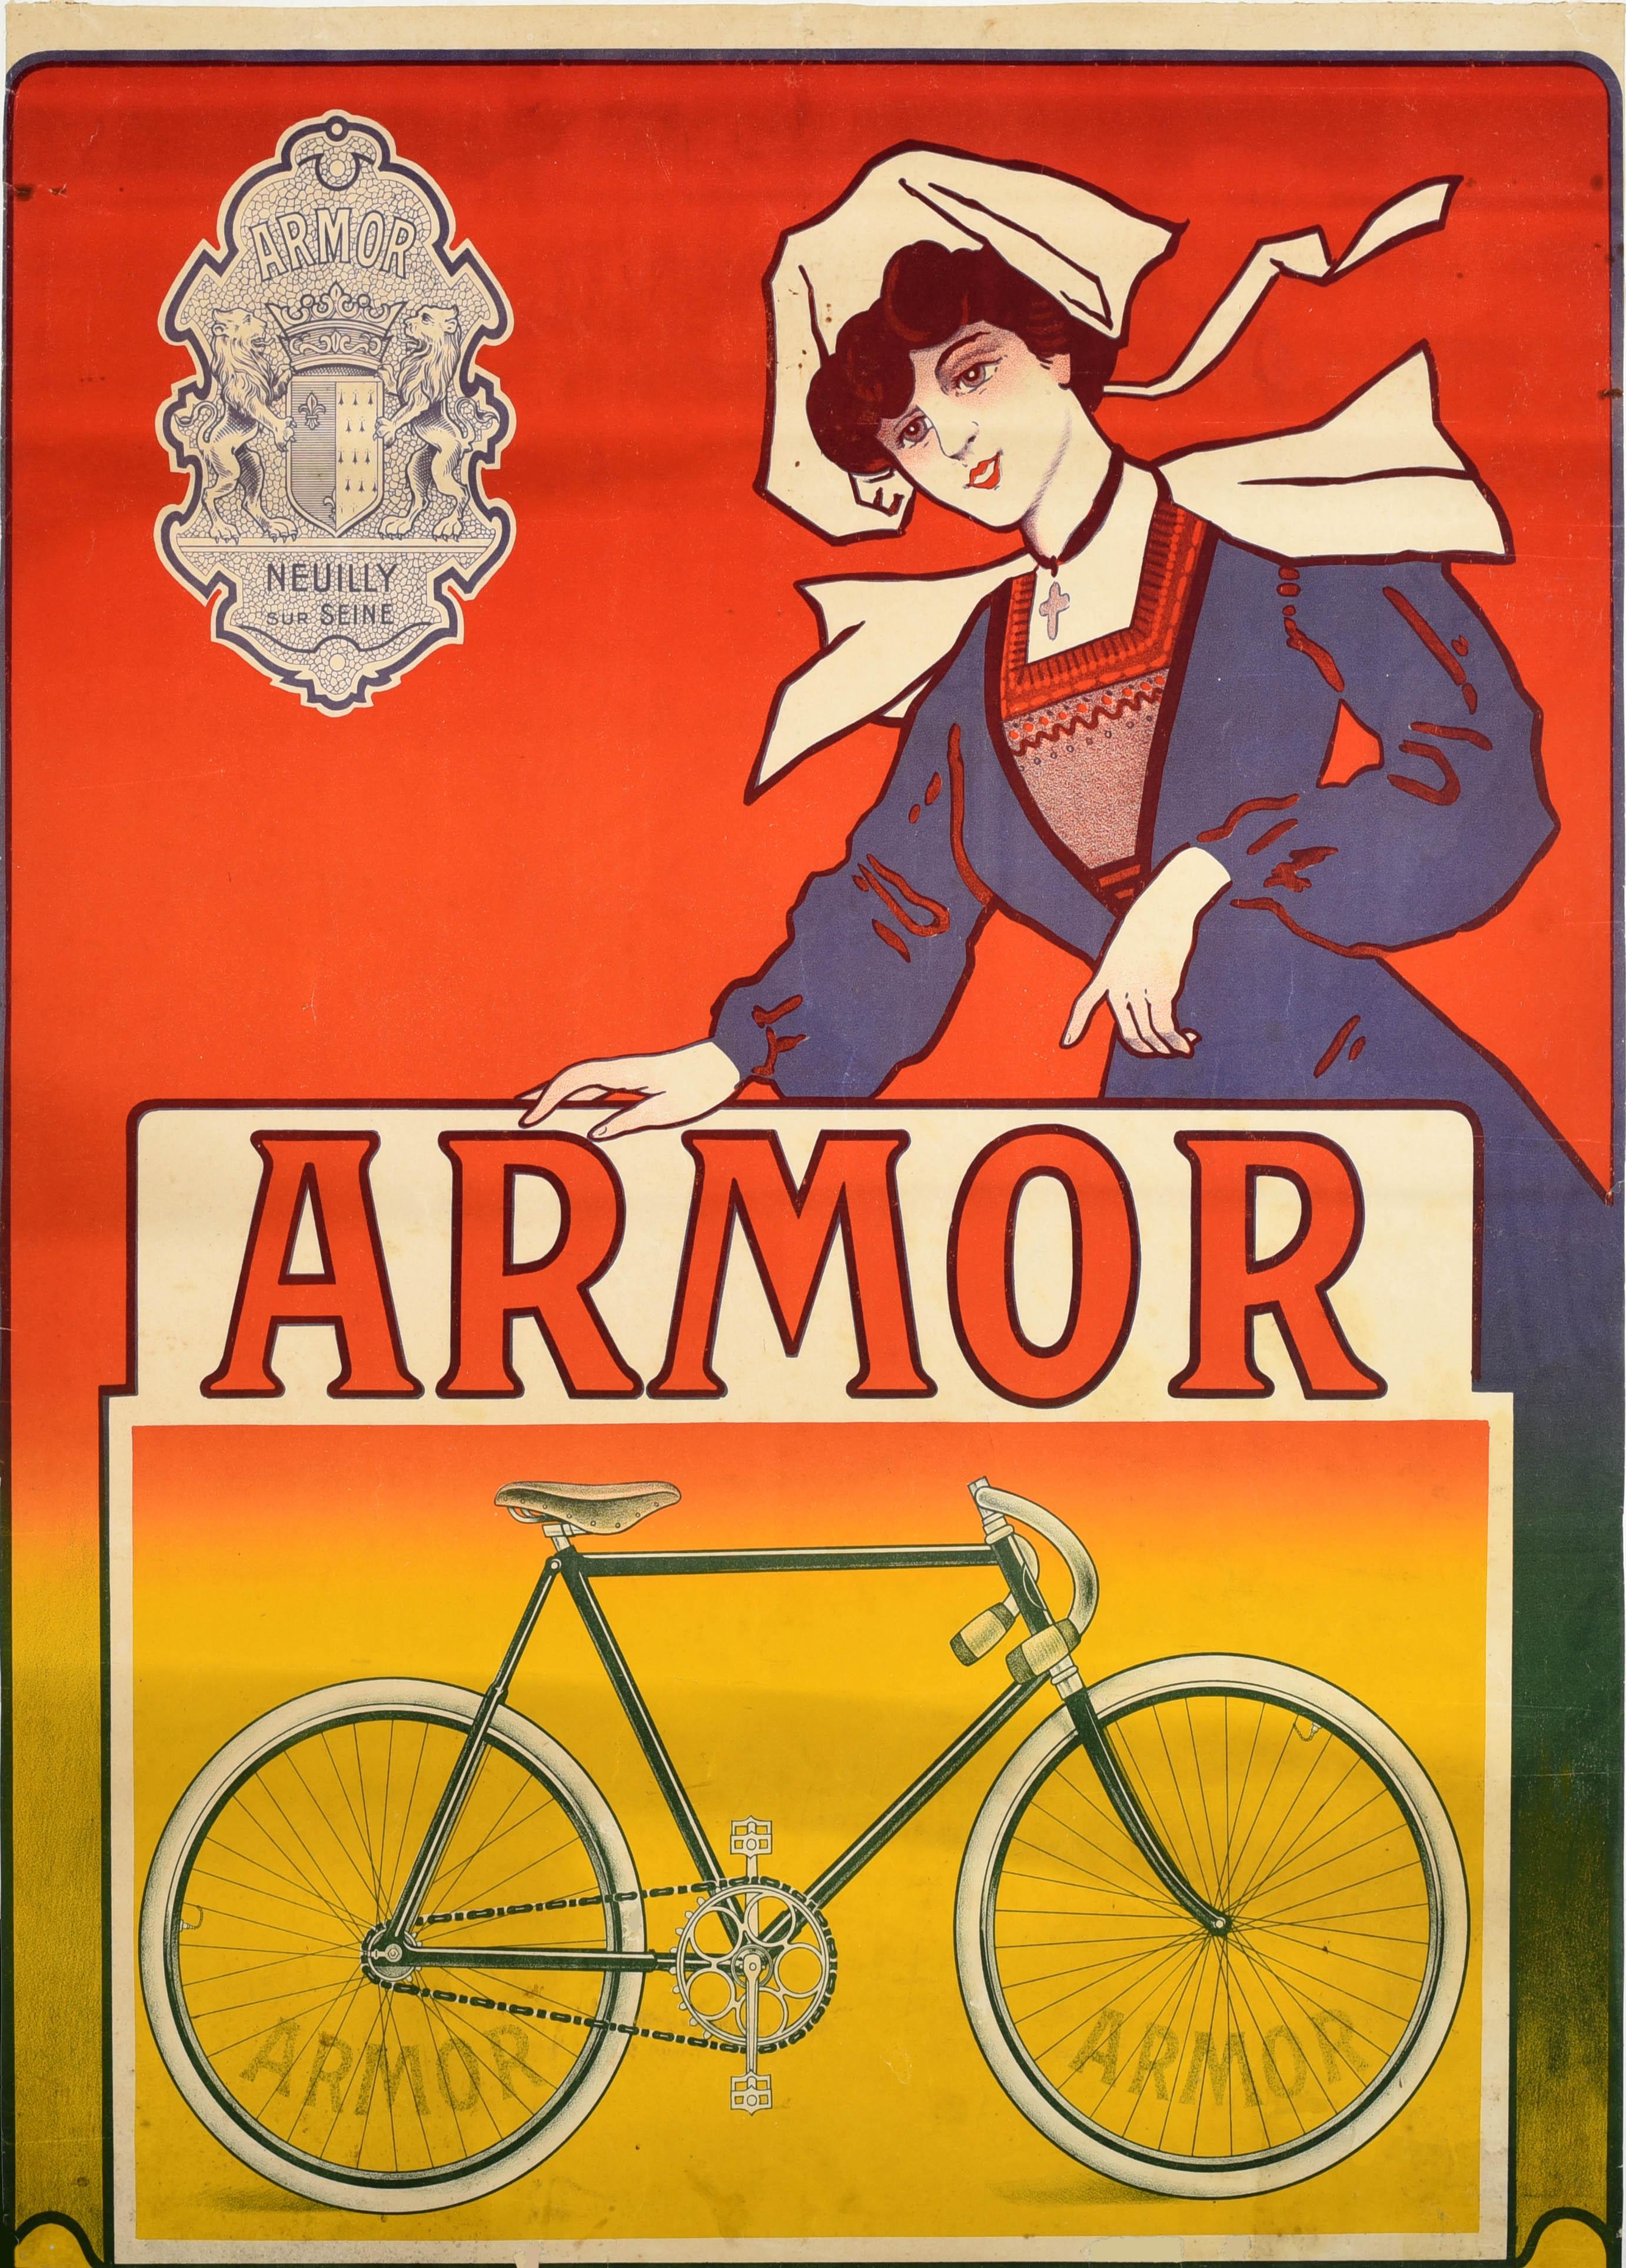 Unknown Print - Original Antique Advertising Poster Armor Bicycles Neuilly Sur Seine France